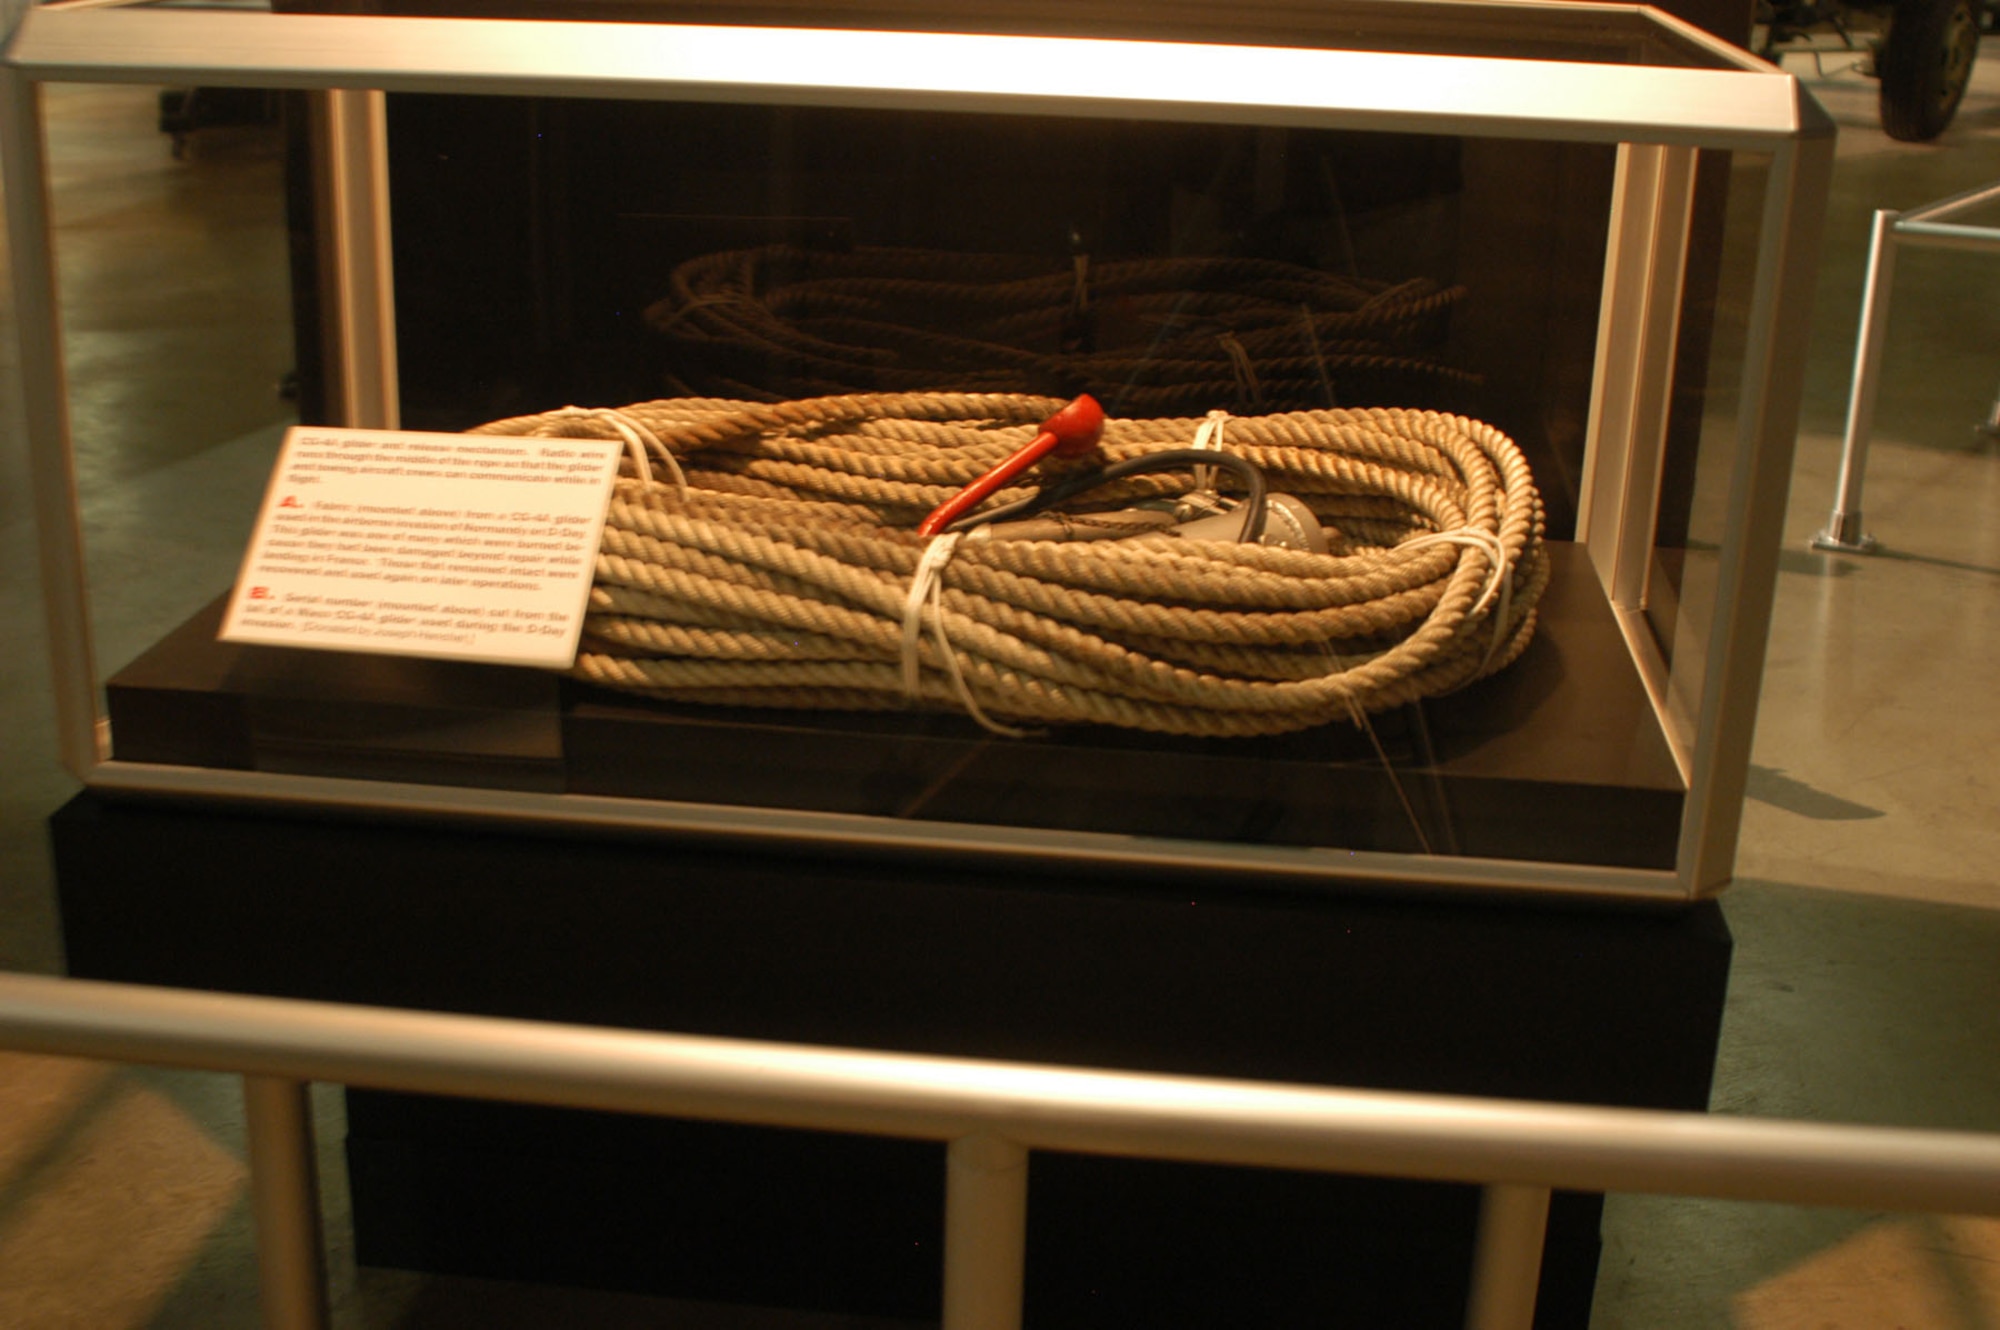 DAYTON, Ohio -- CG-4A glider and release mechanism. Radio wire runs through the middle of the rope so that the glider and towing aircraft crews can communicate while in flight. This item is on display in the World War II Gallery at the National Museum of the U.S. Air Force. (U.S. Air Force photo)